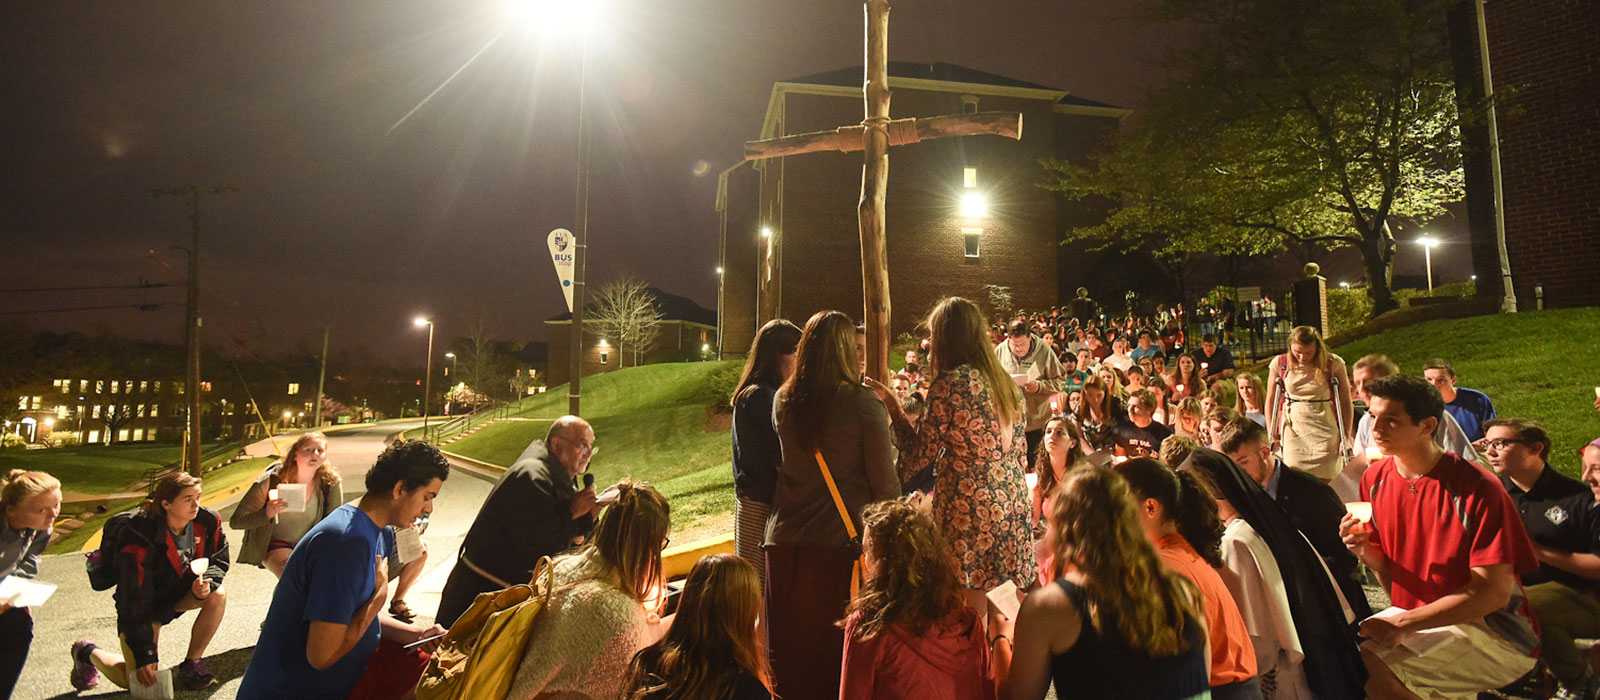 Students participating in Way of the Cross